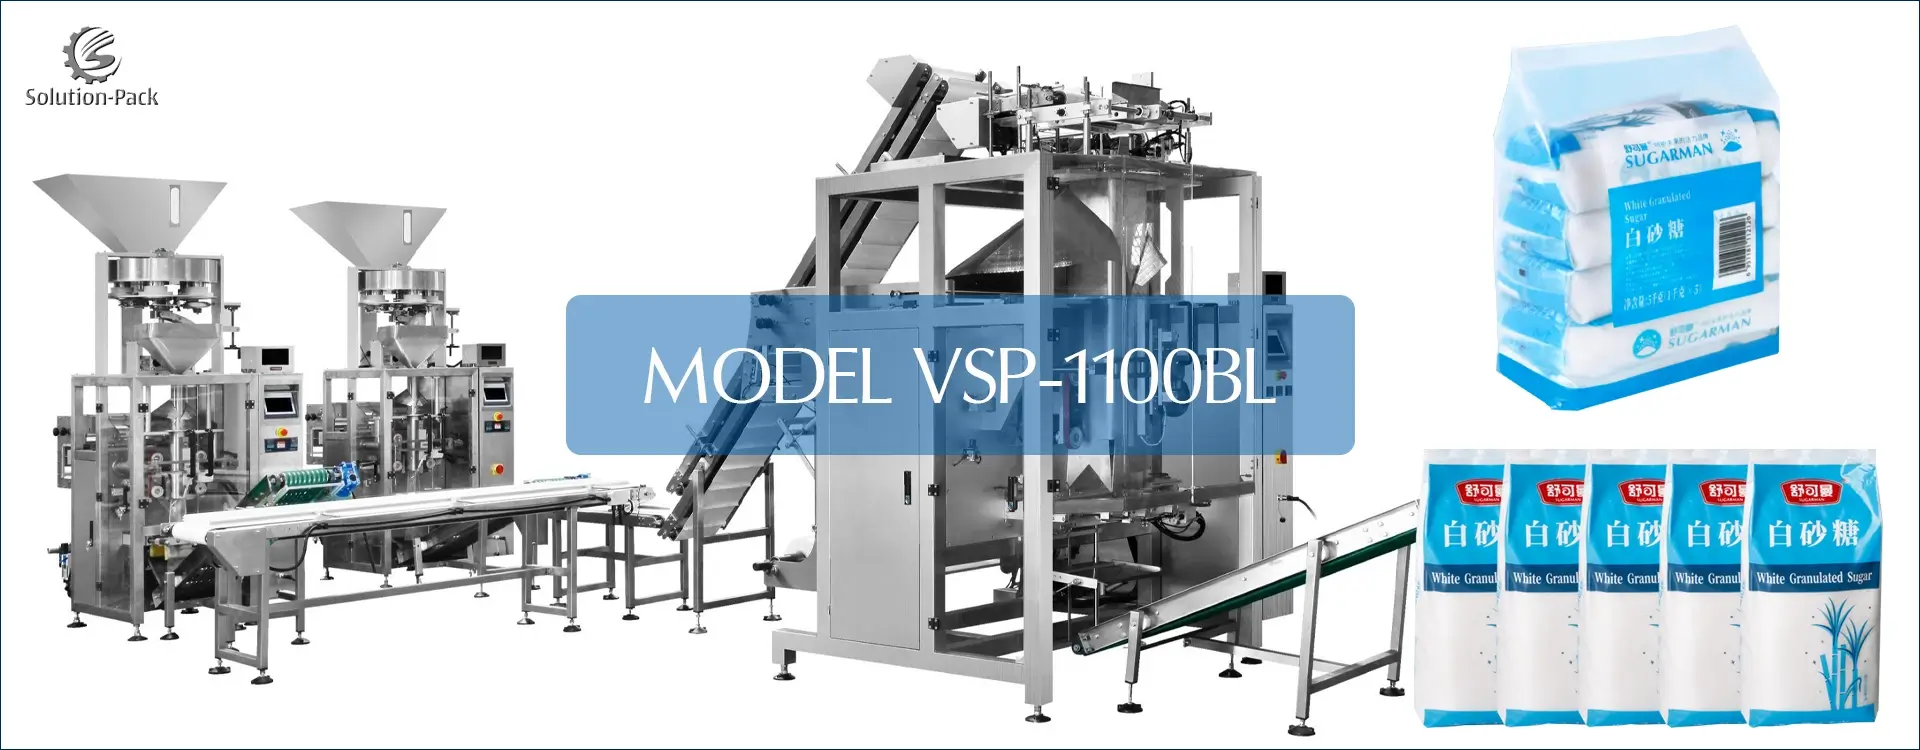 Model VSP-1100BL Automatic Bag-in-Bag Baling Packaging Machine Line | Solution-Pack (Heading Banner Picture)